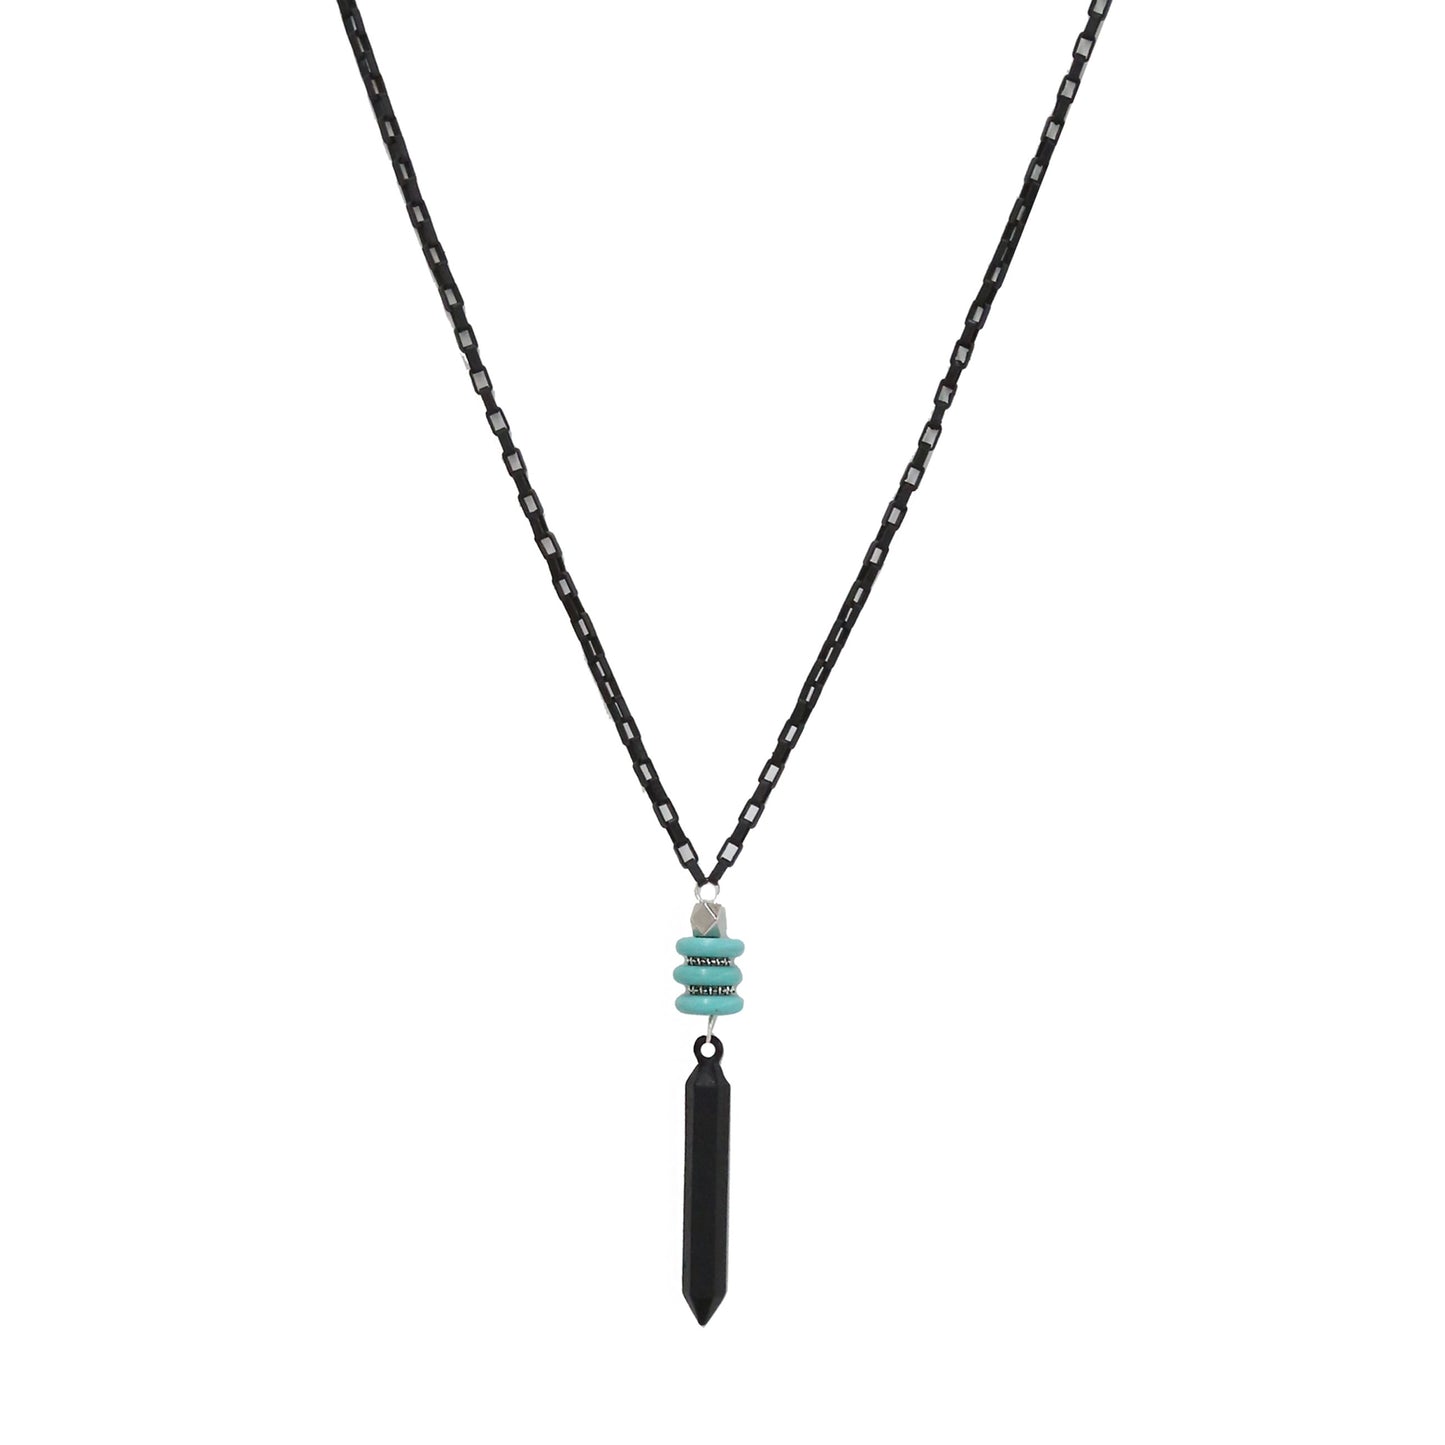 Black Chain Necklace with Turquoise Disc Beads and Black Pendant